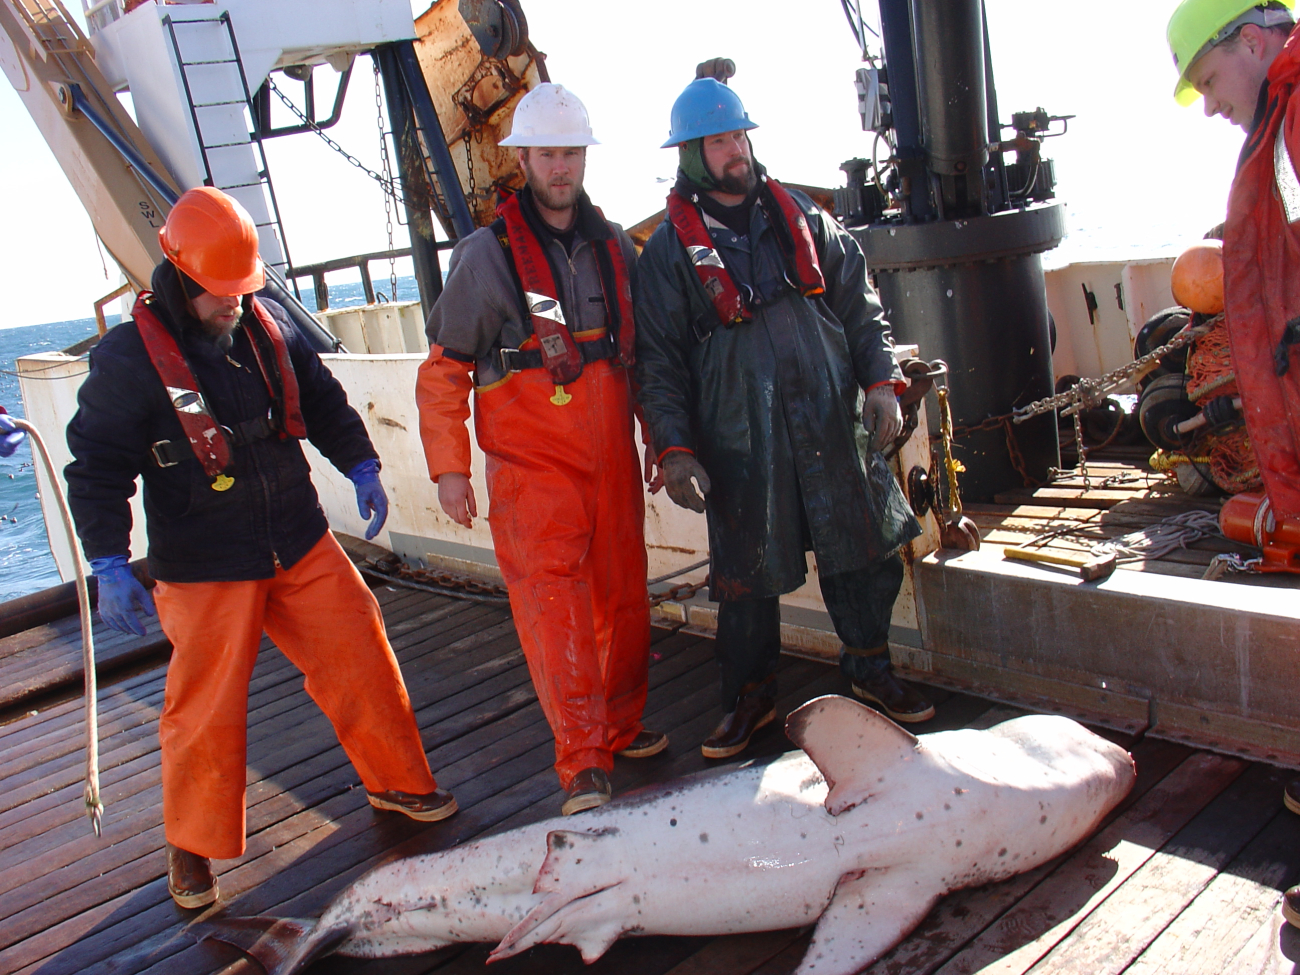 A large shark caught in the trawl